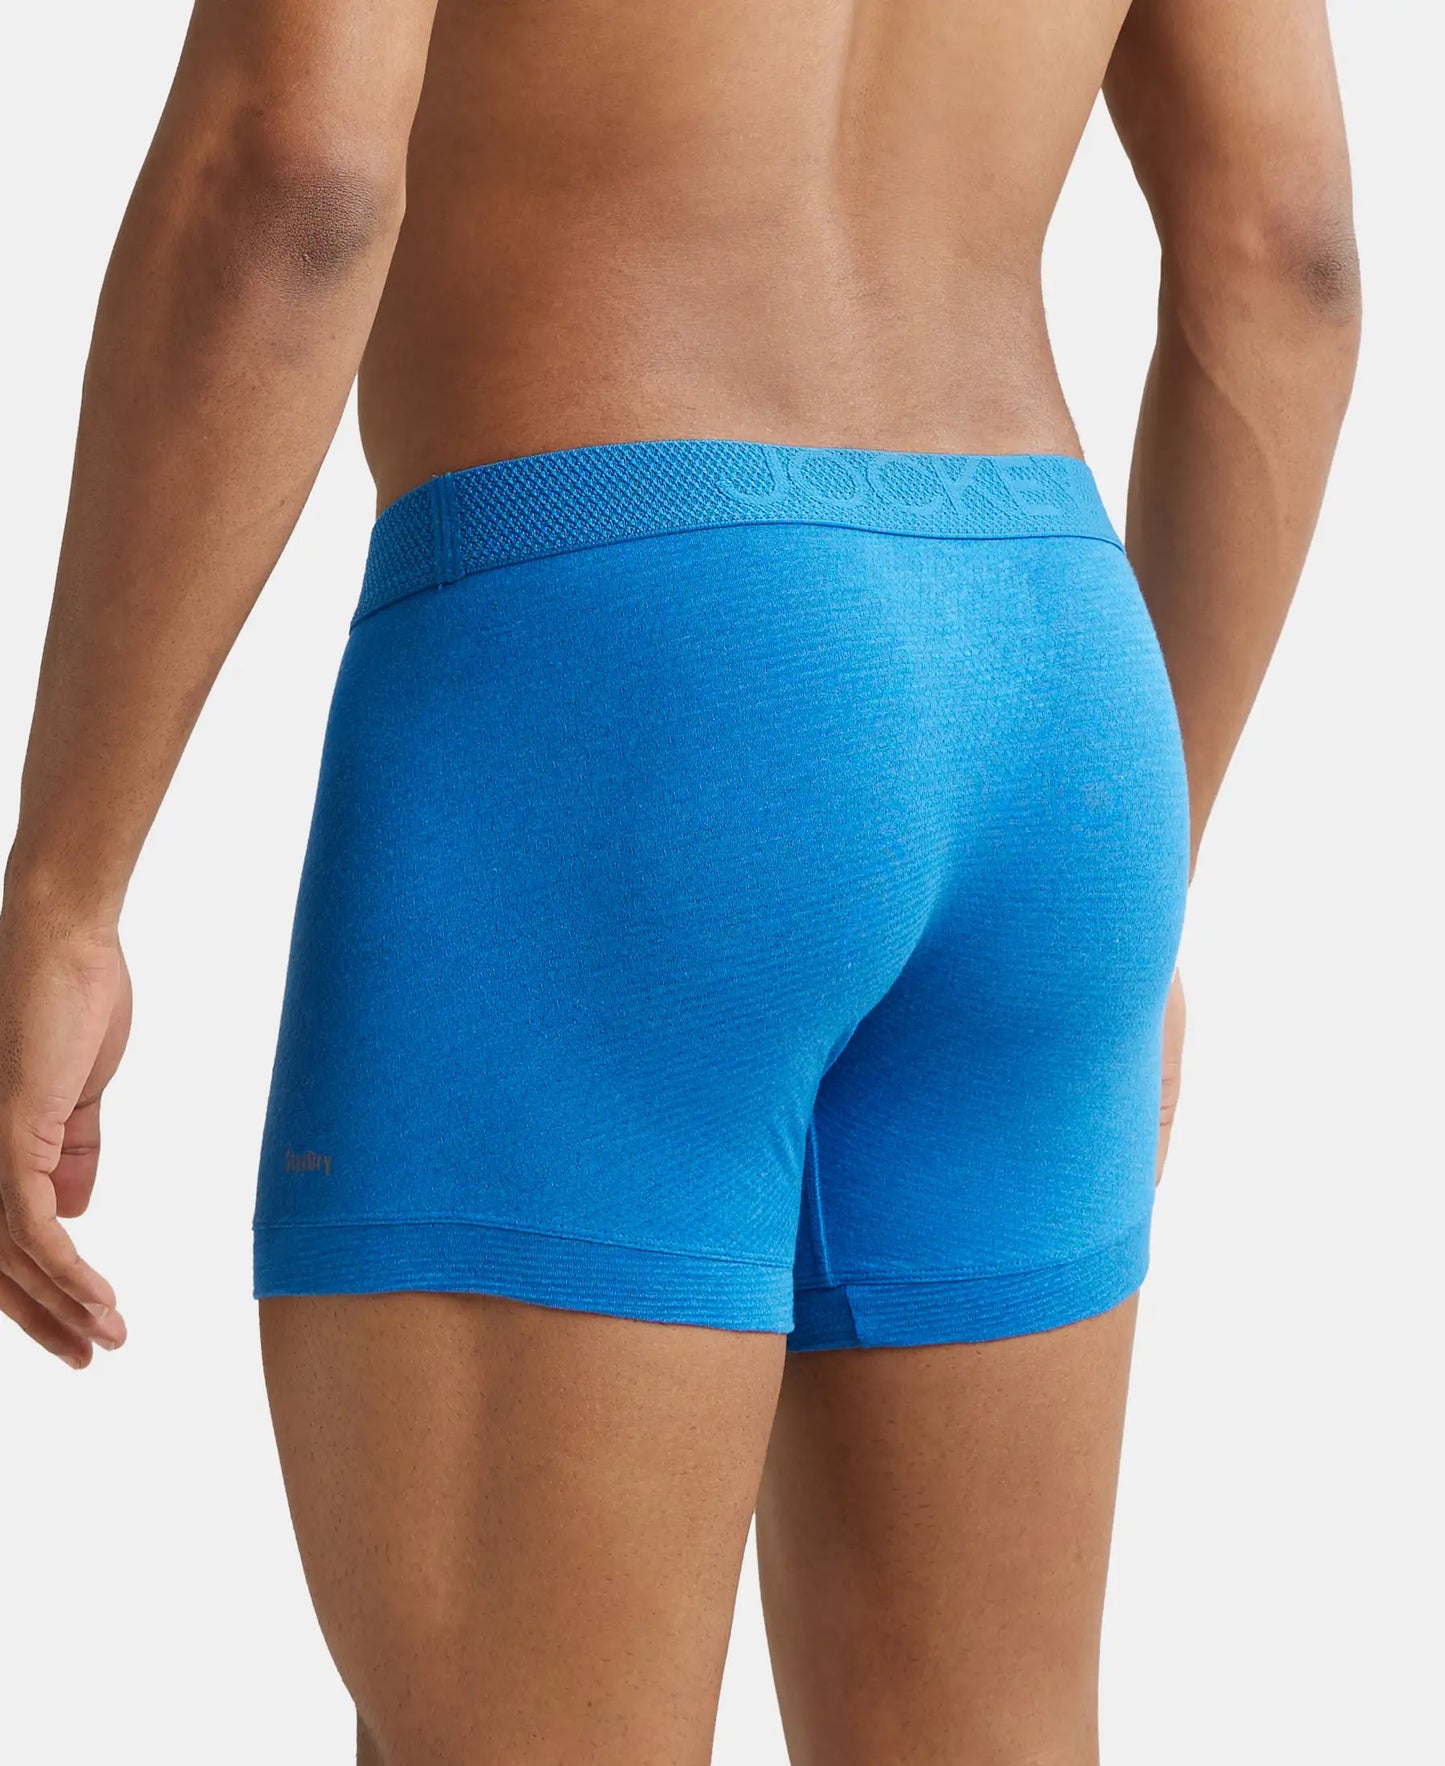 Bamboo Cotton Elastane Breathable Mesh Trunk with StayDry Treatment - Move Blue Melange-3